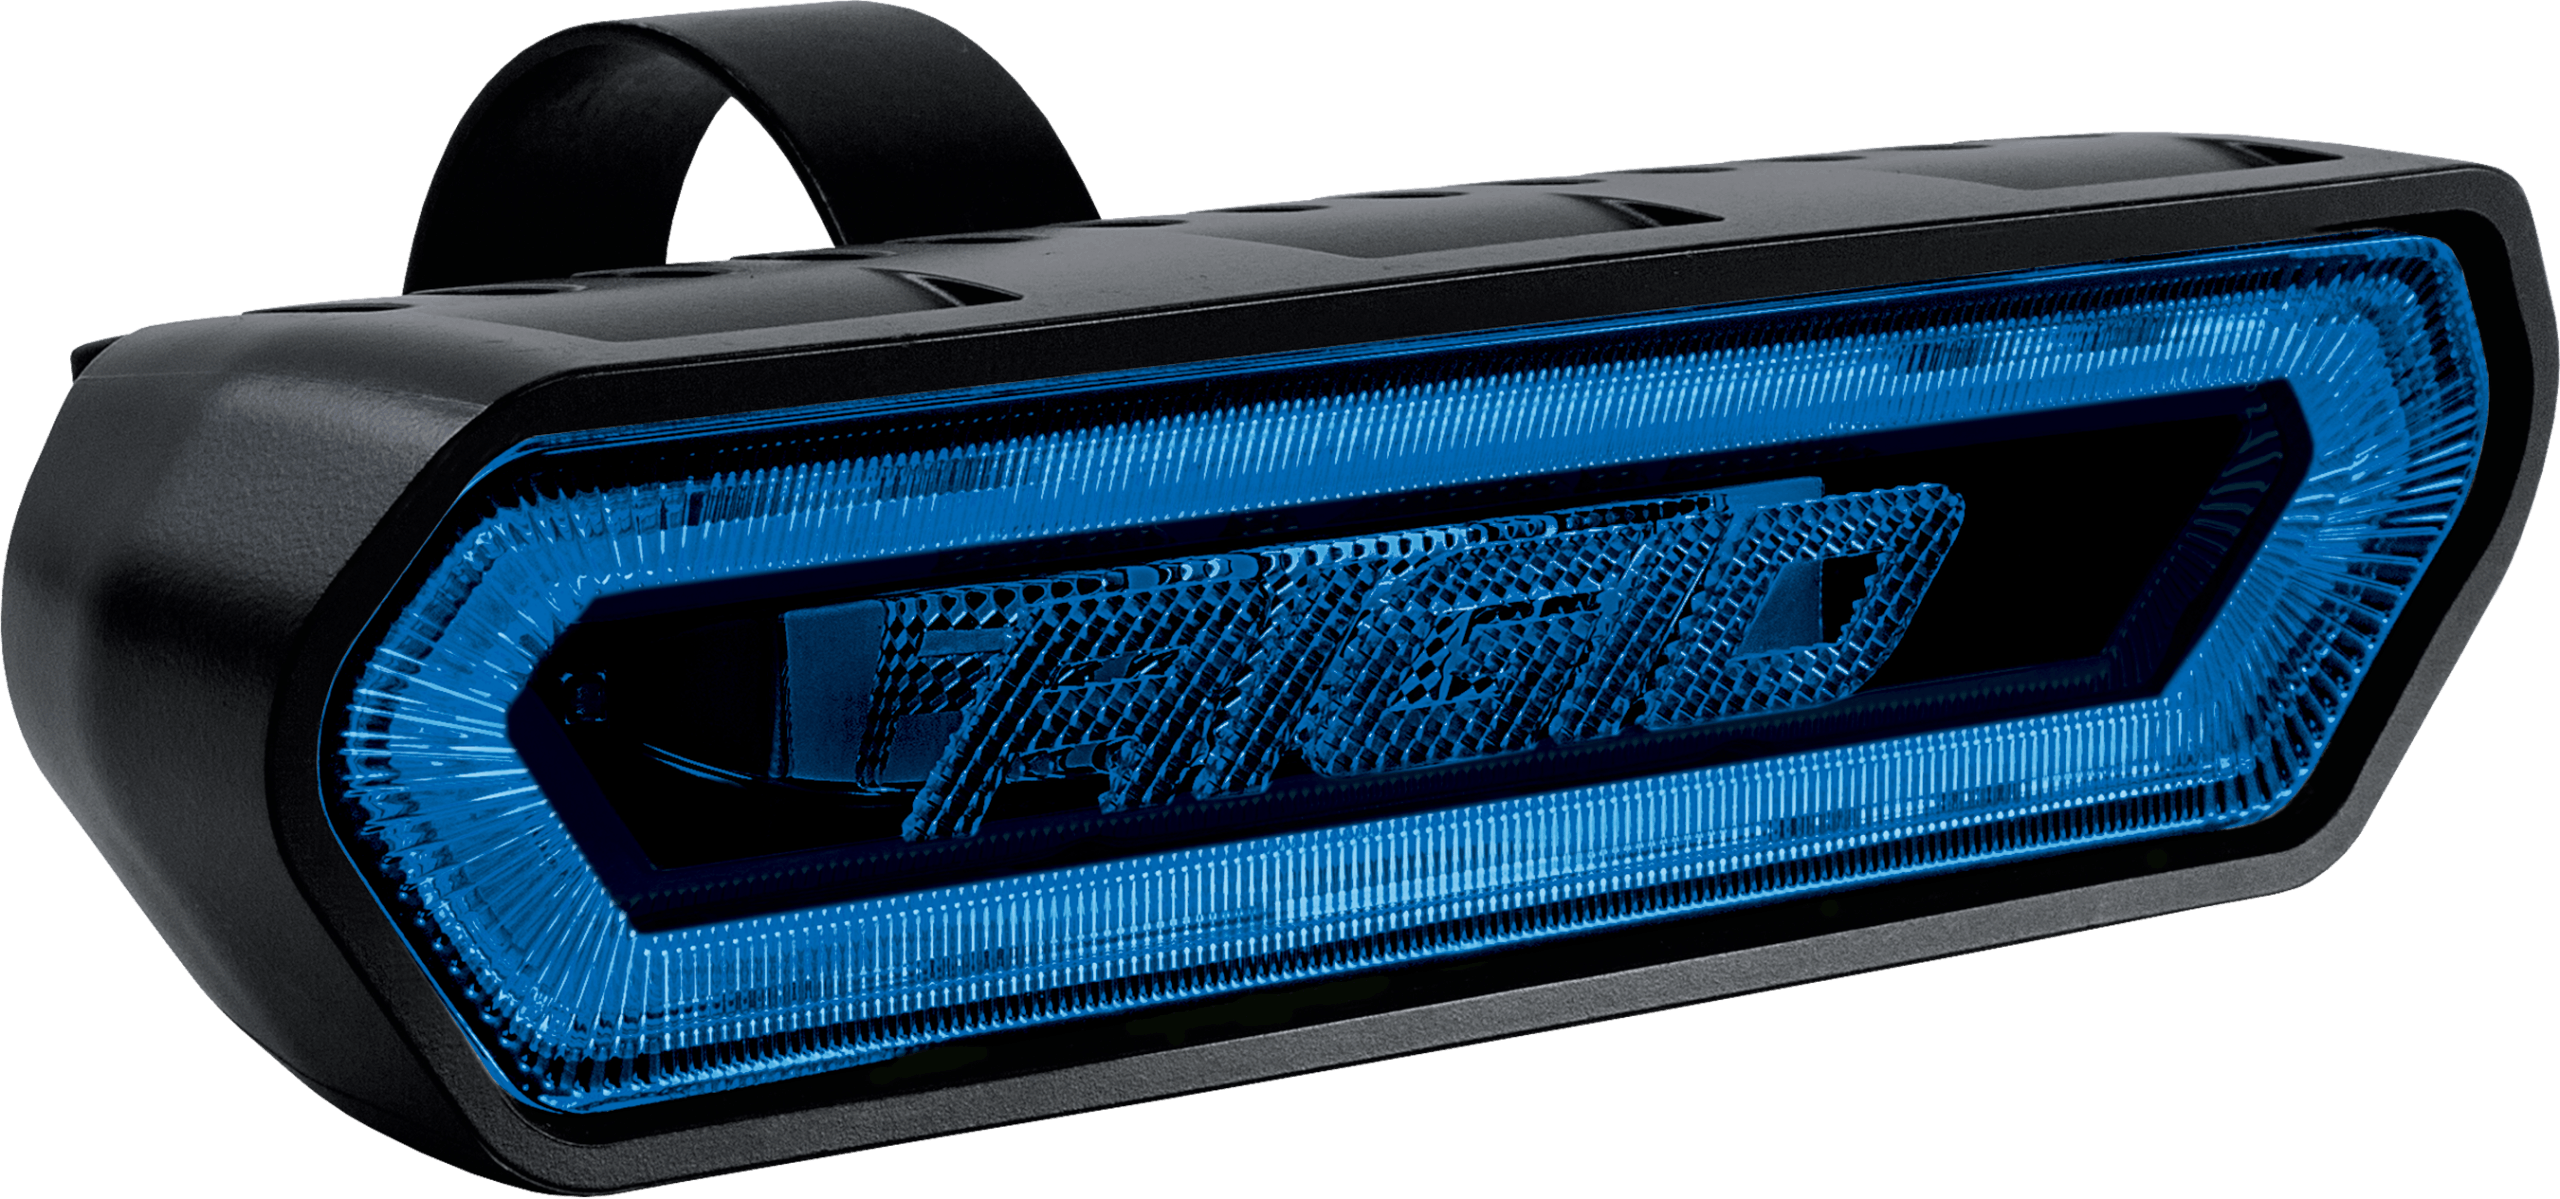 RIGID Industries 901801 RIGID Chase Rear Facing 27 Mode 5 Color LED Light Bar 28 Inch, Tube Mount